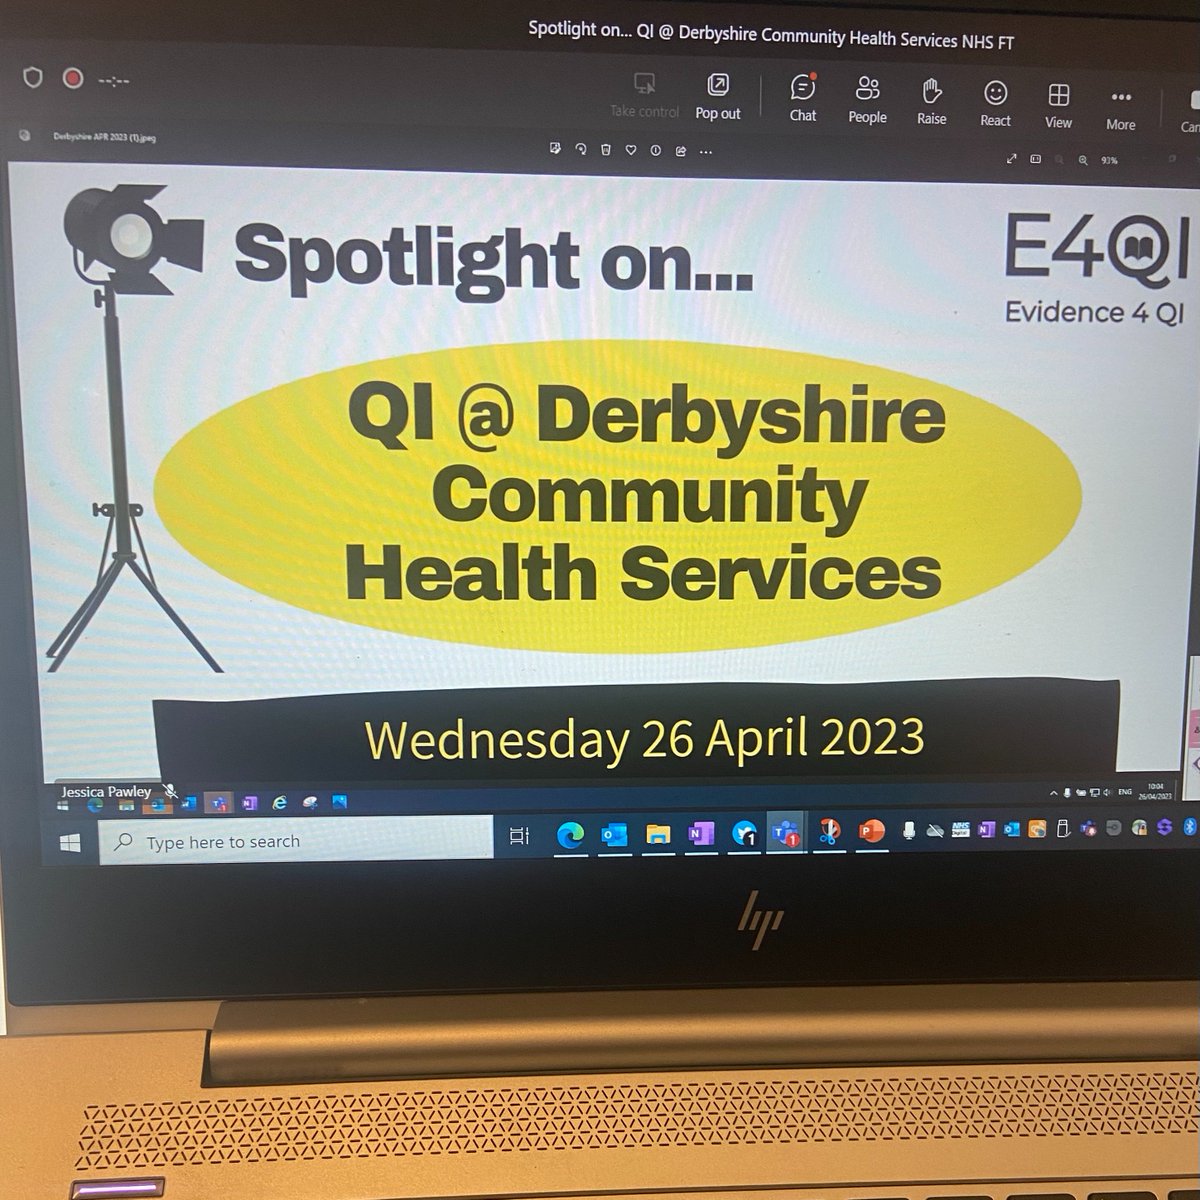 We loved presenting our QI journey at the @Evidence4QI Spotlight session this morning🤩 Thank you for having us and for all of the amazing feedback👏 @HayleySGrice @LaurenGascoyn10 @LisaJBarrett6 @DCHStrust @andreadgibbons #QITwitter